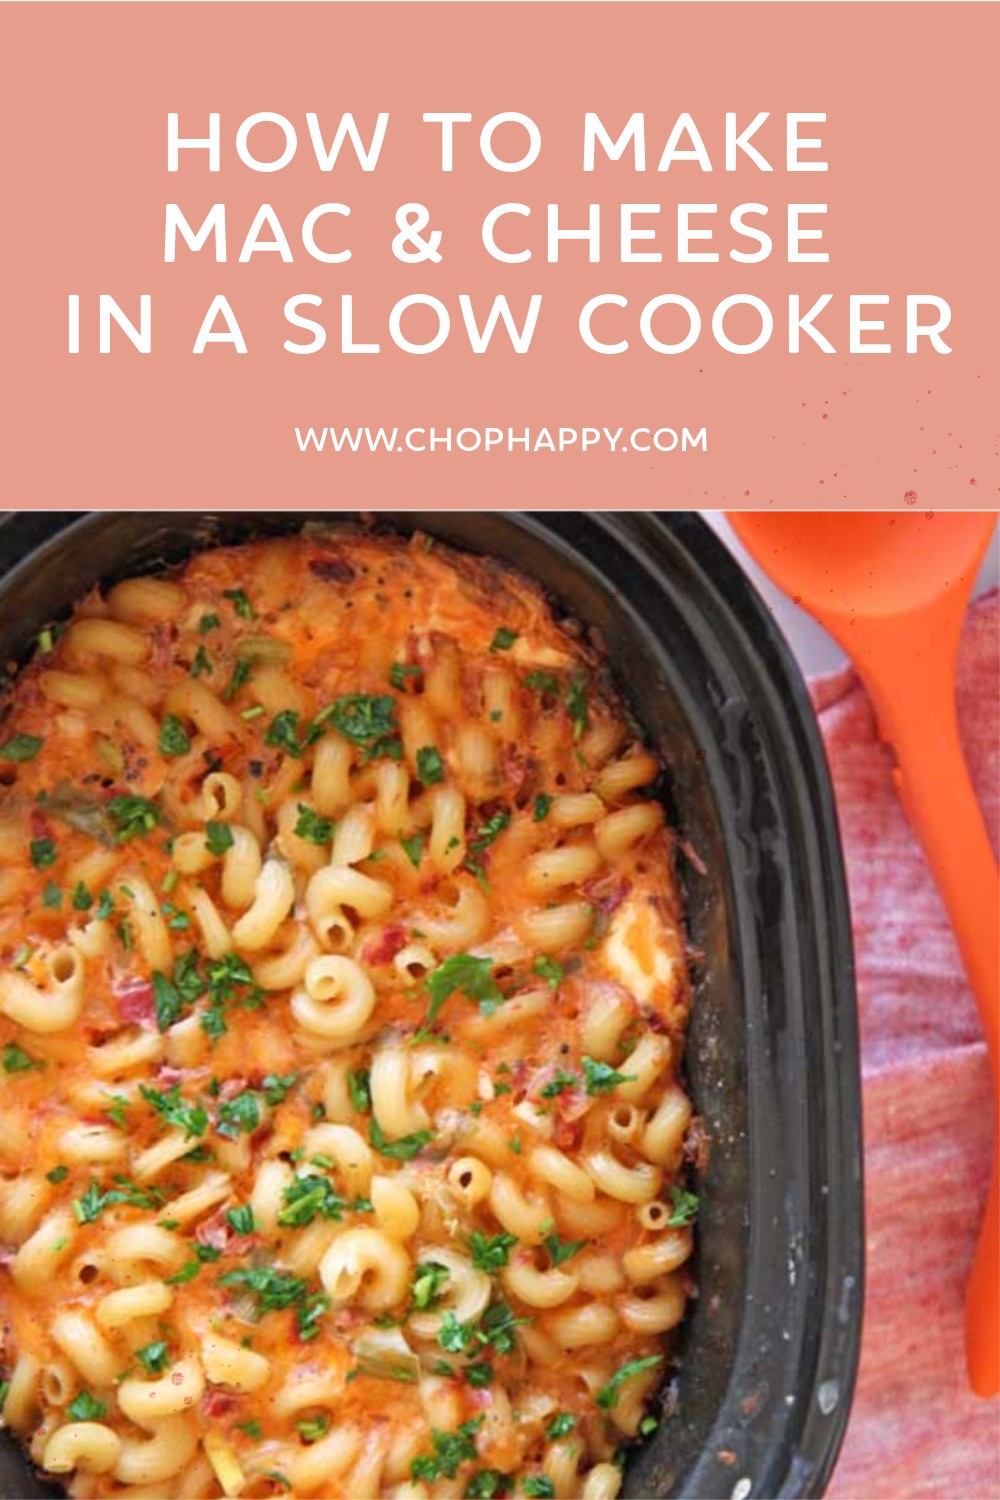 How to Make Mac and Cheese in a Slow Cooker. Grab pasta, evaporated milk, cream cheese, cheddar cheese, and pantry seasonings. This is a pasta hack because the pasta cooks in the slow cooker. Happy Cooking! www.ChopHappy.com #macandcheese #slowcookerrecipe